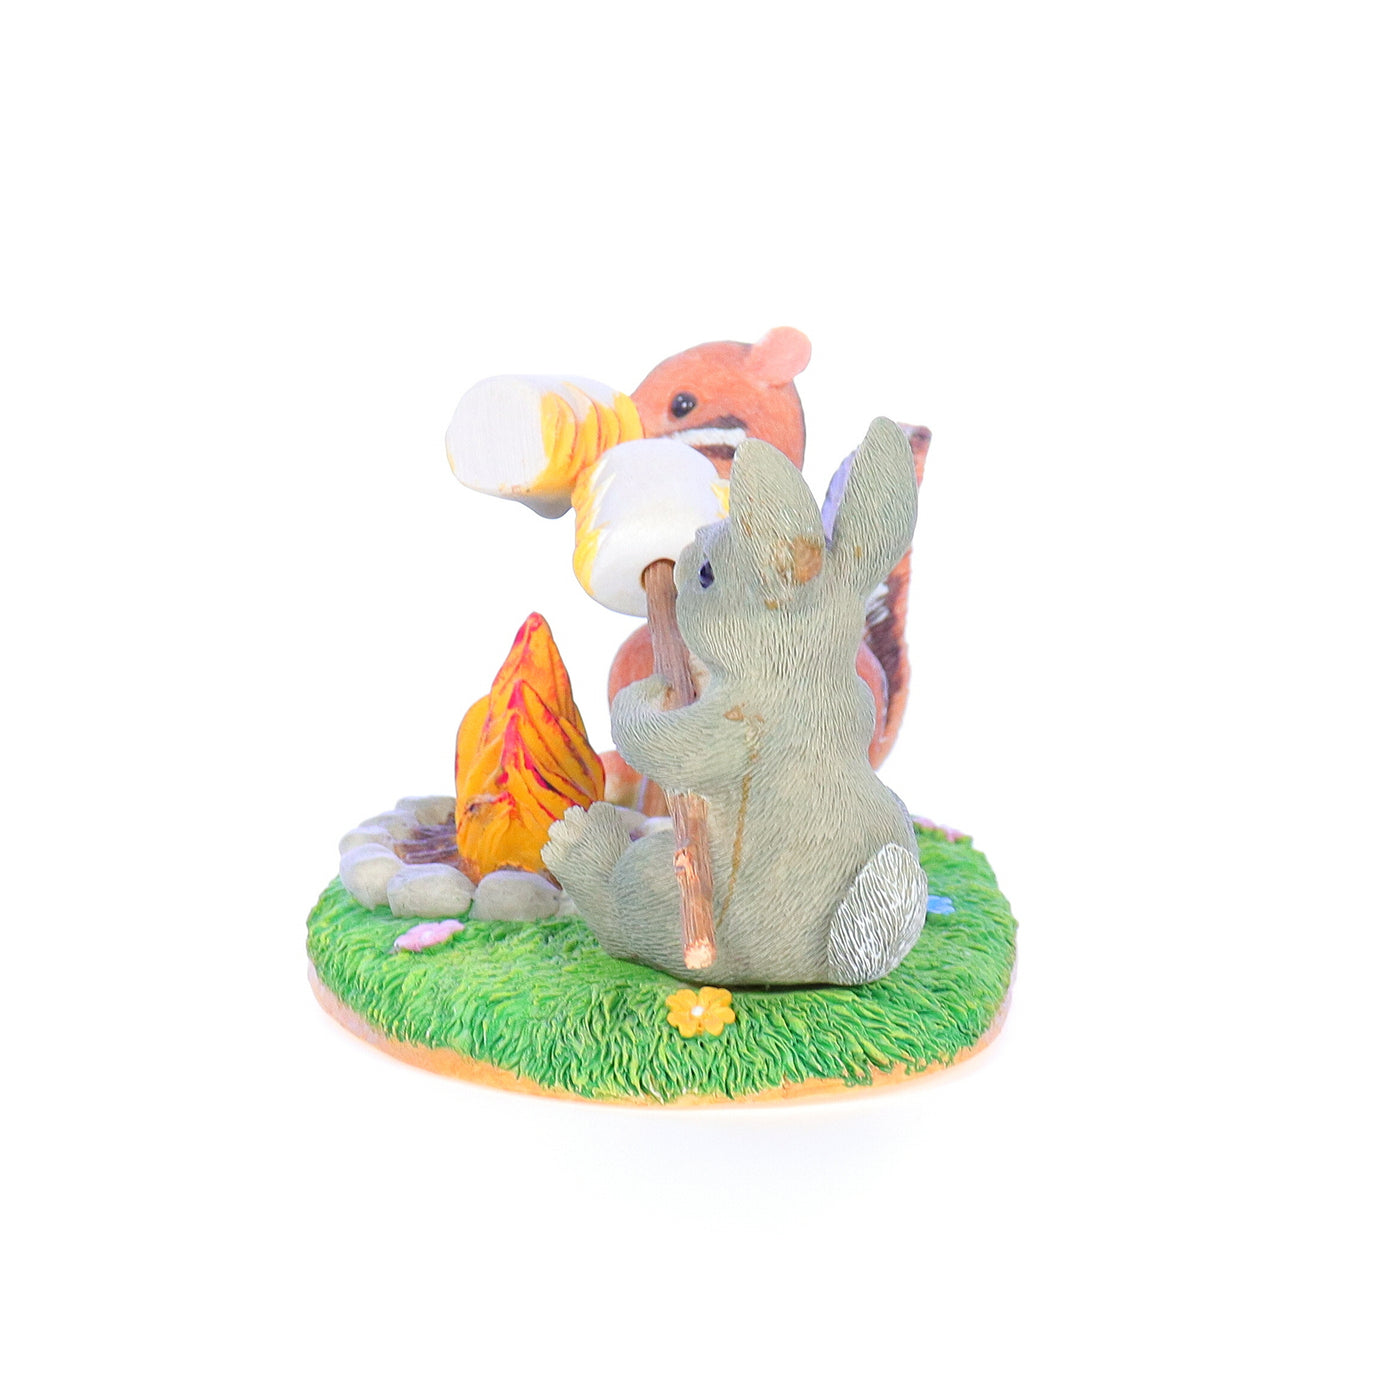 charming tails 83700 toasting marshmallows friendship figurine Left